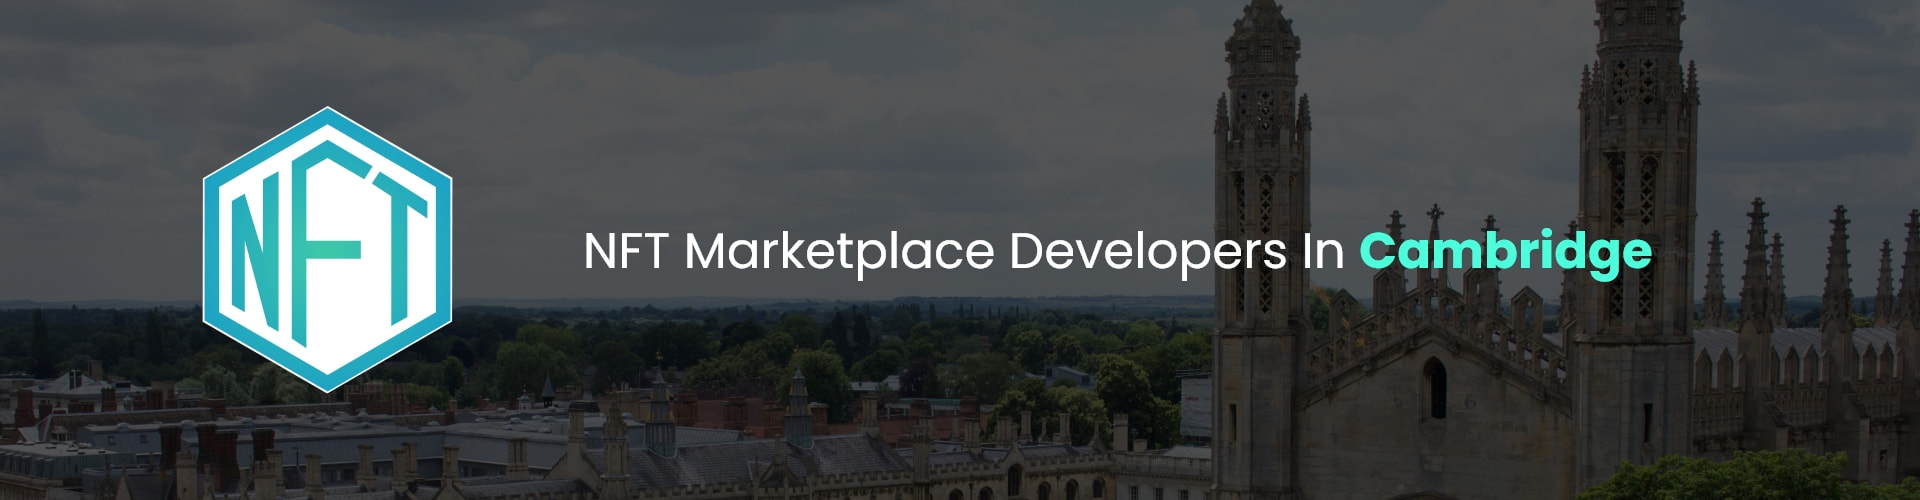 hire nft marketplace developers in cambridge